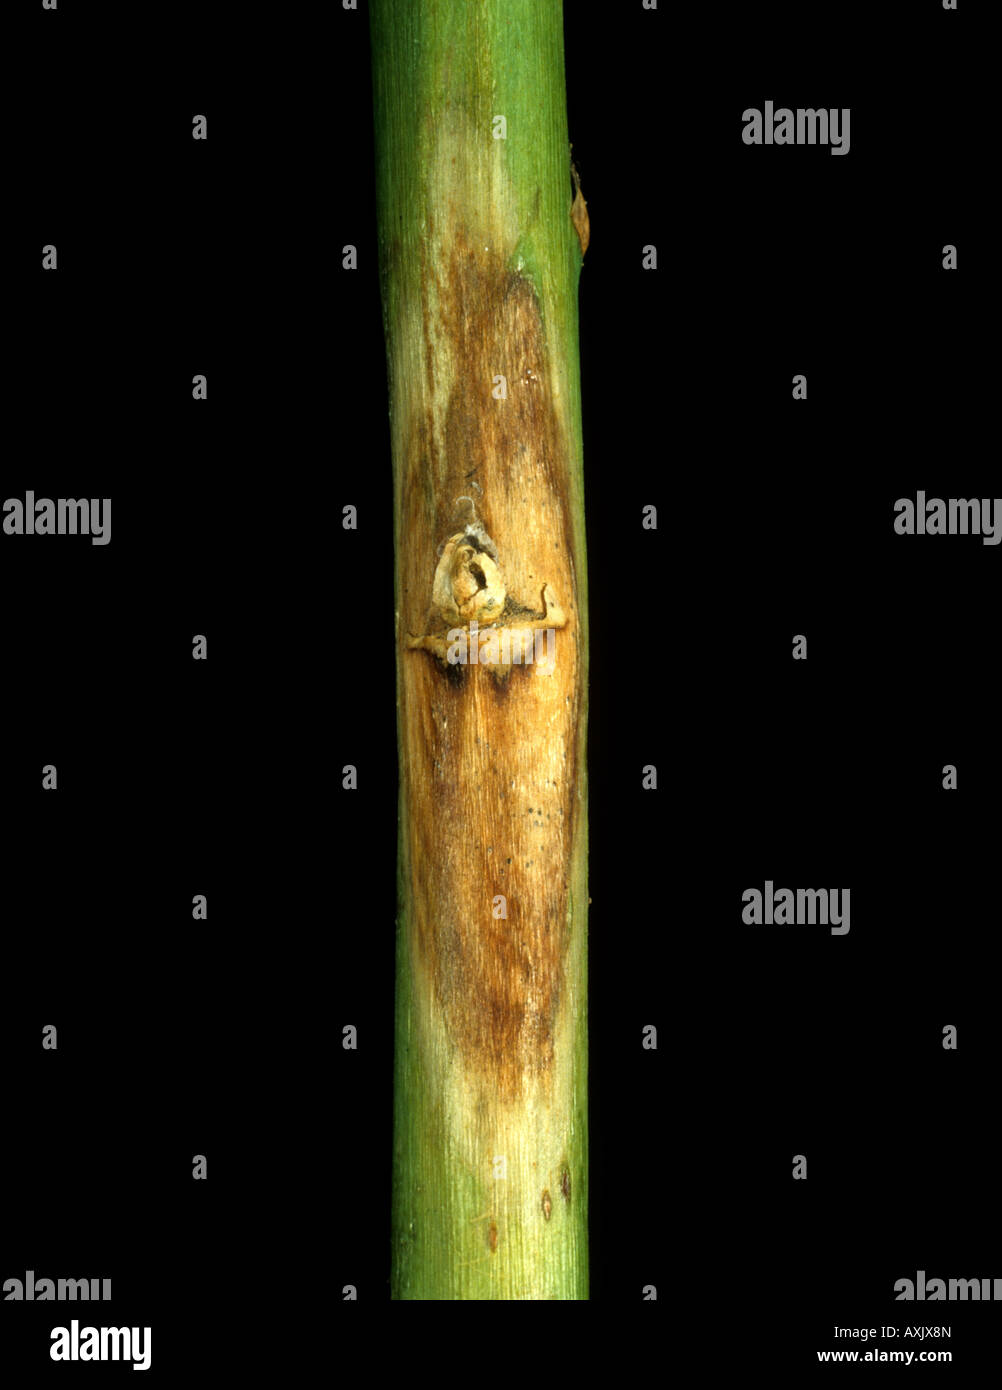 Antracnose Colletotrichum spp lesion on an aubergine or eggplant stem Stock Photo